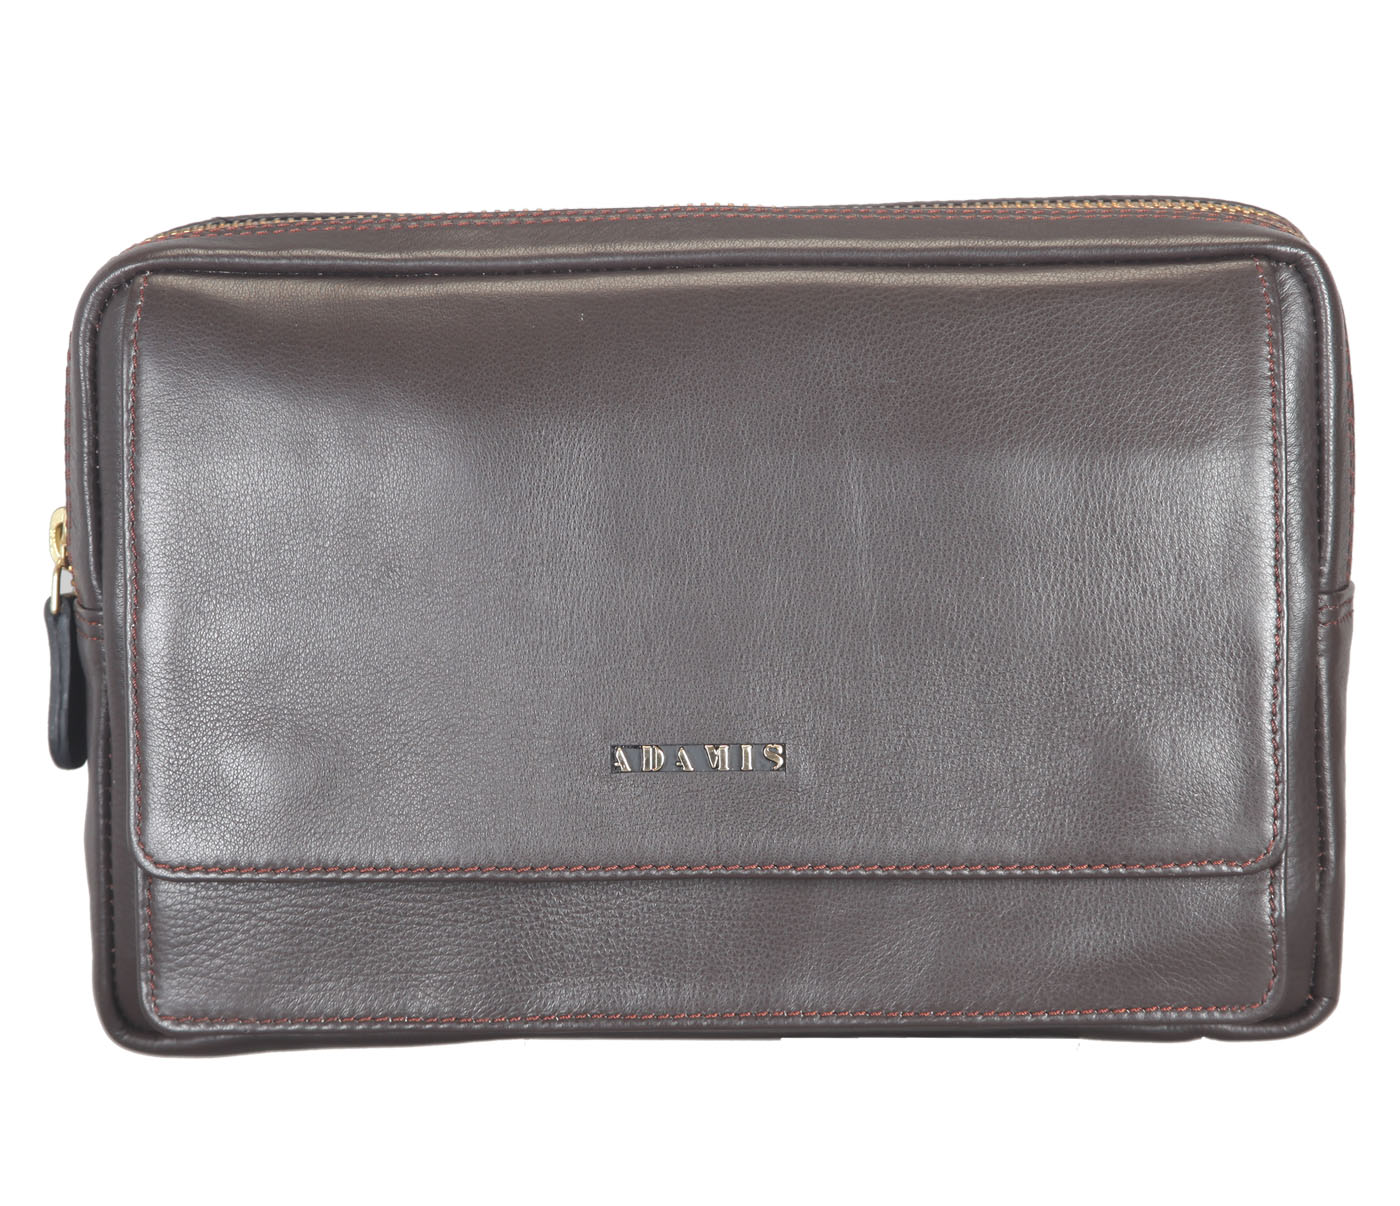 P32-Jesse-Men's bag cum travel pouch in Genuine Leather - Brown.